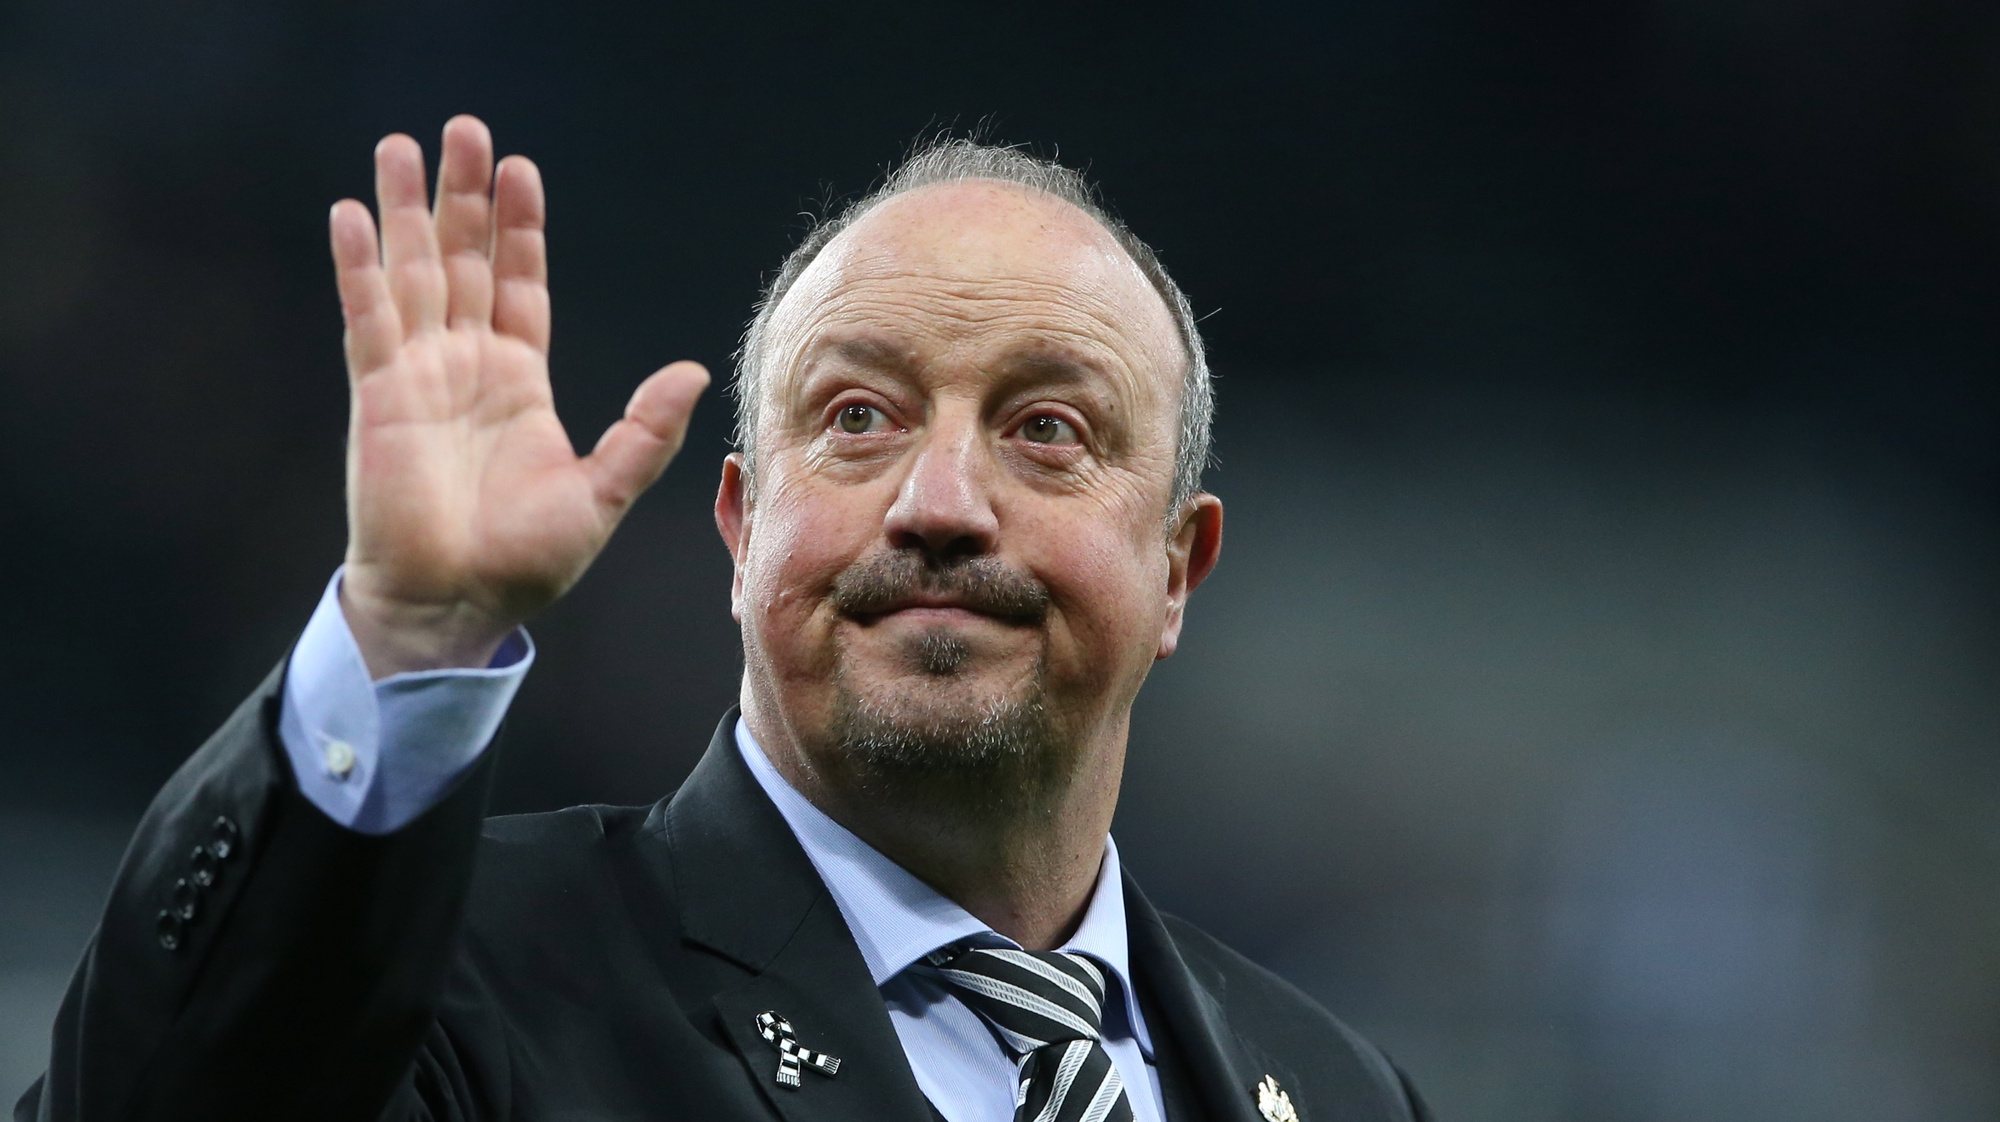 epa07547684 Newcastle United Rafa Benitez greets supporters after losing the English Premier League soccer match between Newcastle United and Liverpool FC at St James&#039; Park in Newcastle, Britain, 04 May 2019.  EPA/NIGEL RODDIS EDITORIAL USE ONLY. No use with unauthorized audio, video, data, fixture lists, club/league logos or &#039;live&#039; services. Online in-match use limited to 120 images, no video emulation. No use in betting, games or single club/league/player publications